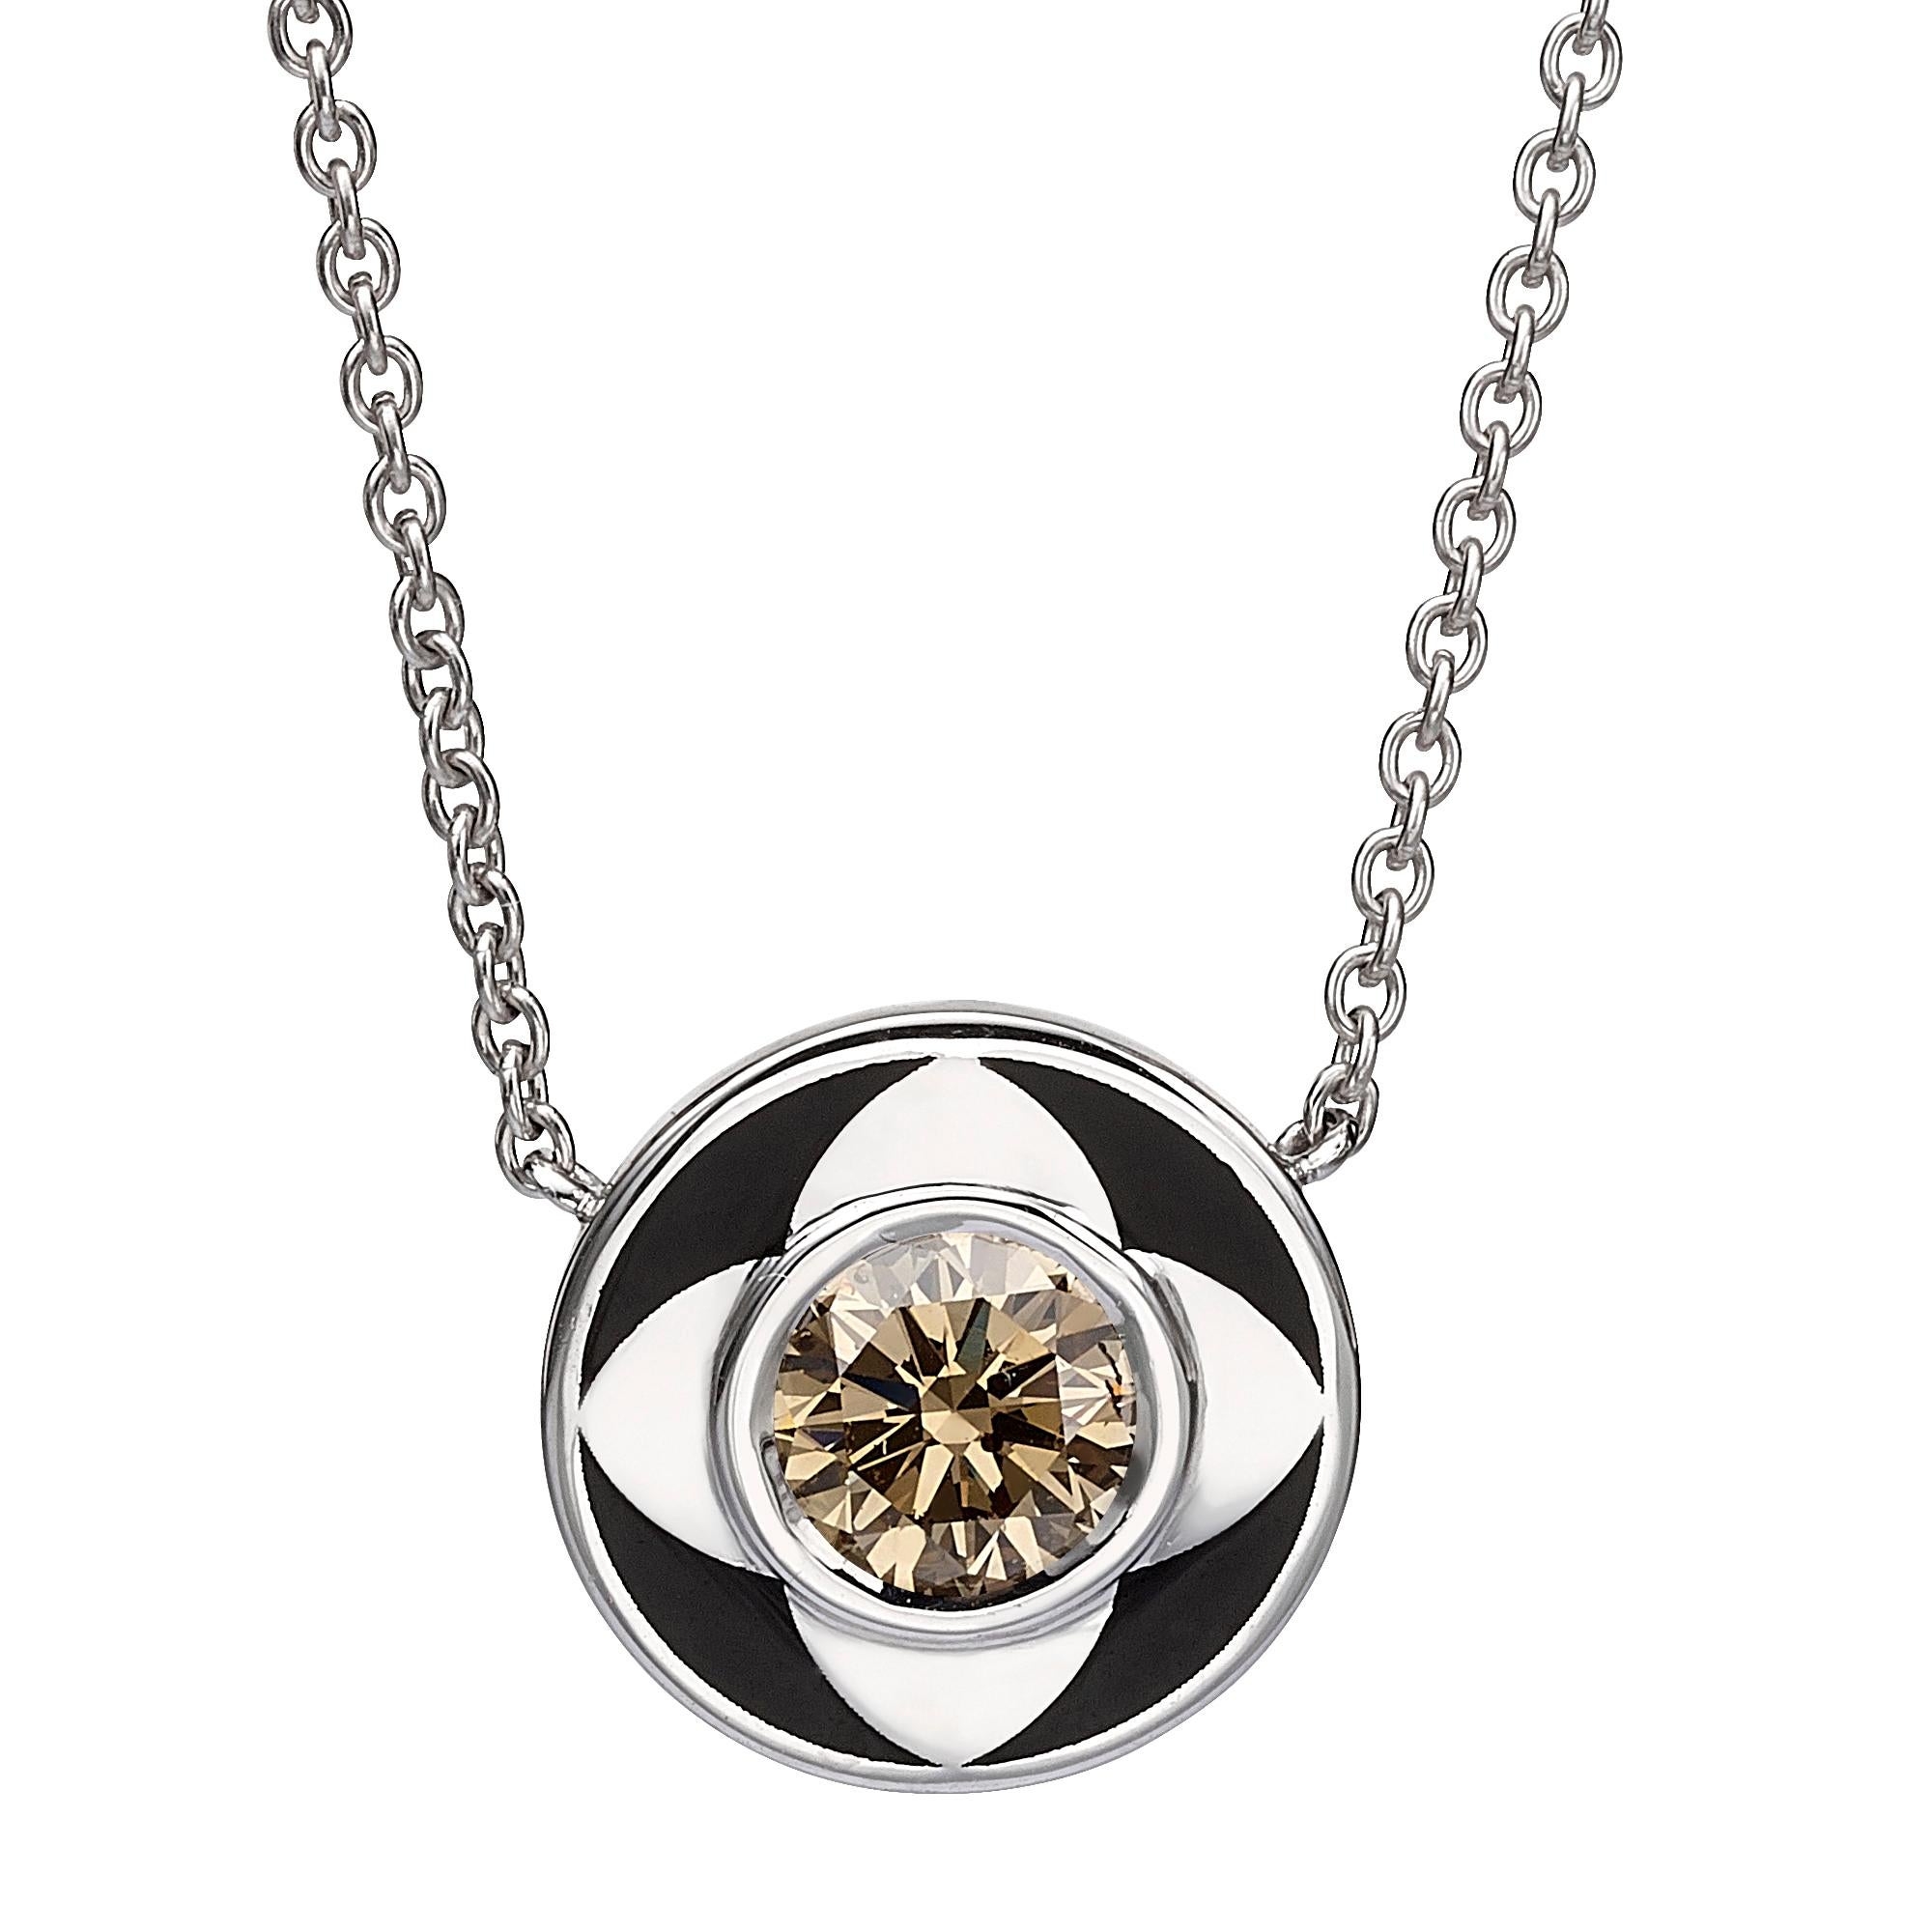 SKU# 4006118

A Round Shaped Black Enamel Diamond Pendant with a center round diamond 1.01 carat Fancy Orangy Brown.The pendant is made of 18 karat white gold, which is known for its durability and luxurious appearance. The gold is designed in a